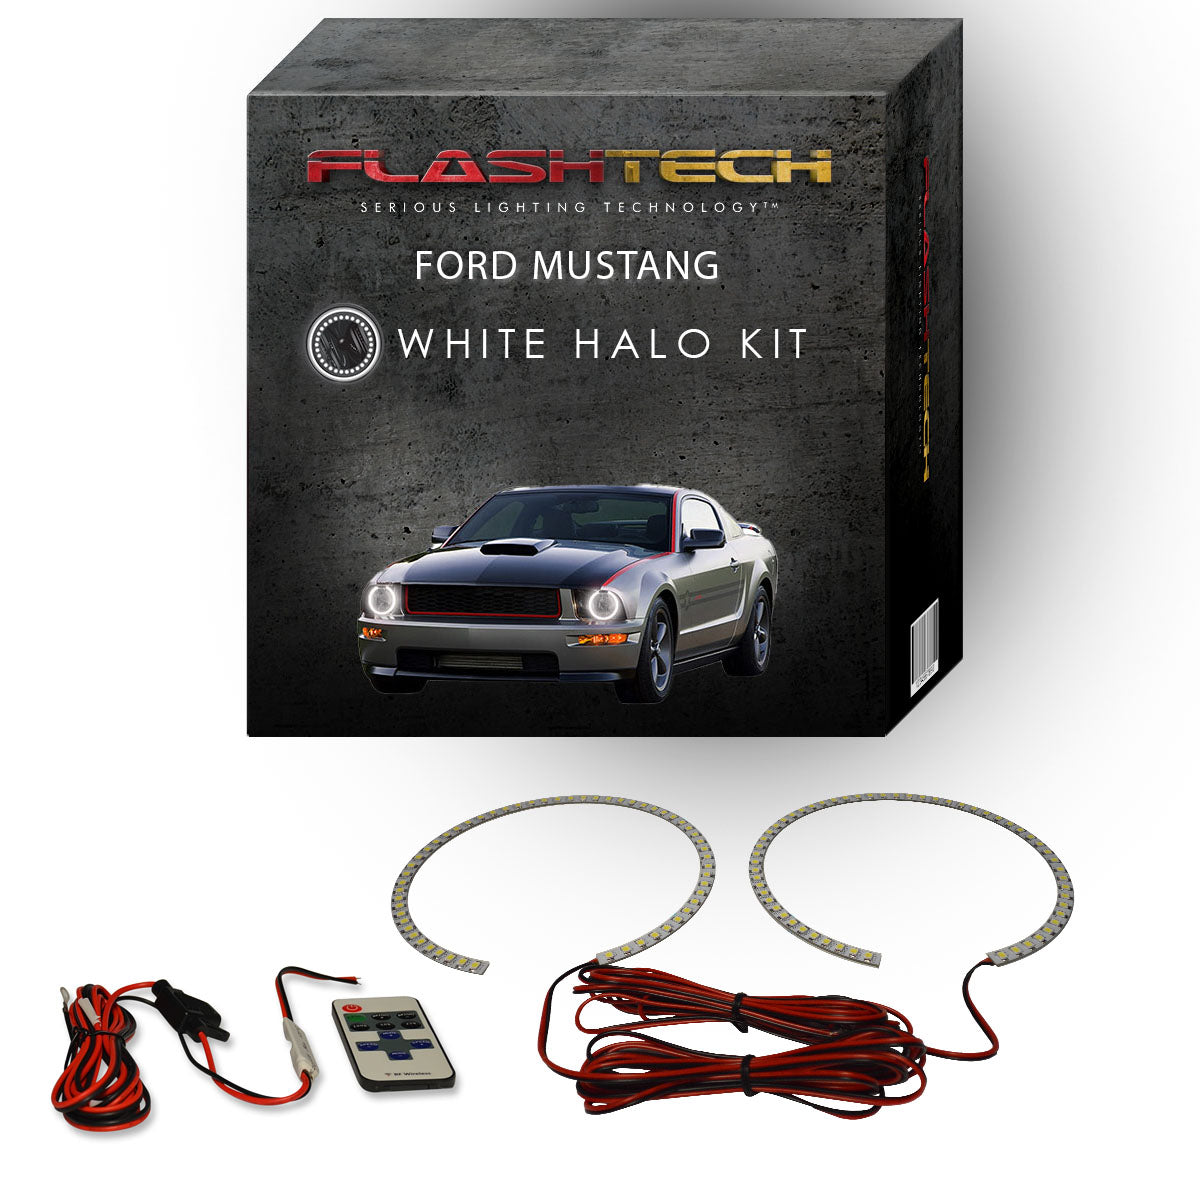 Ford-Mustang-2005, 2006, 2007, 2008, 2009-LED-Halo-Headlights-White-RF Remote White-FO-MU0509-WHRF